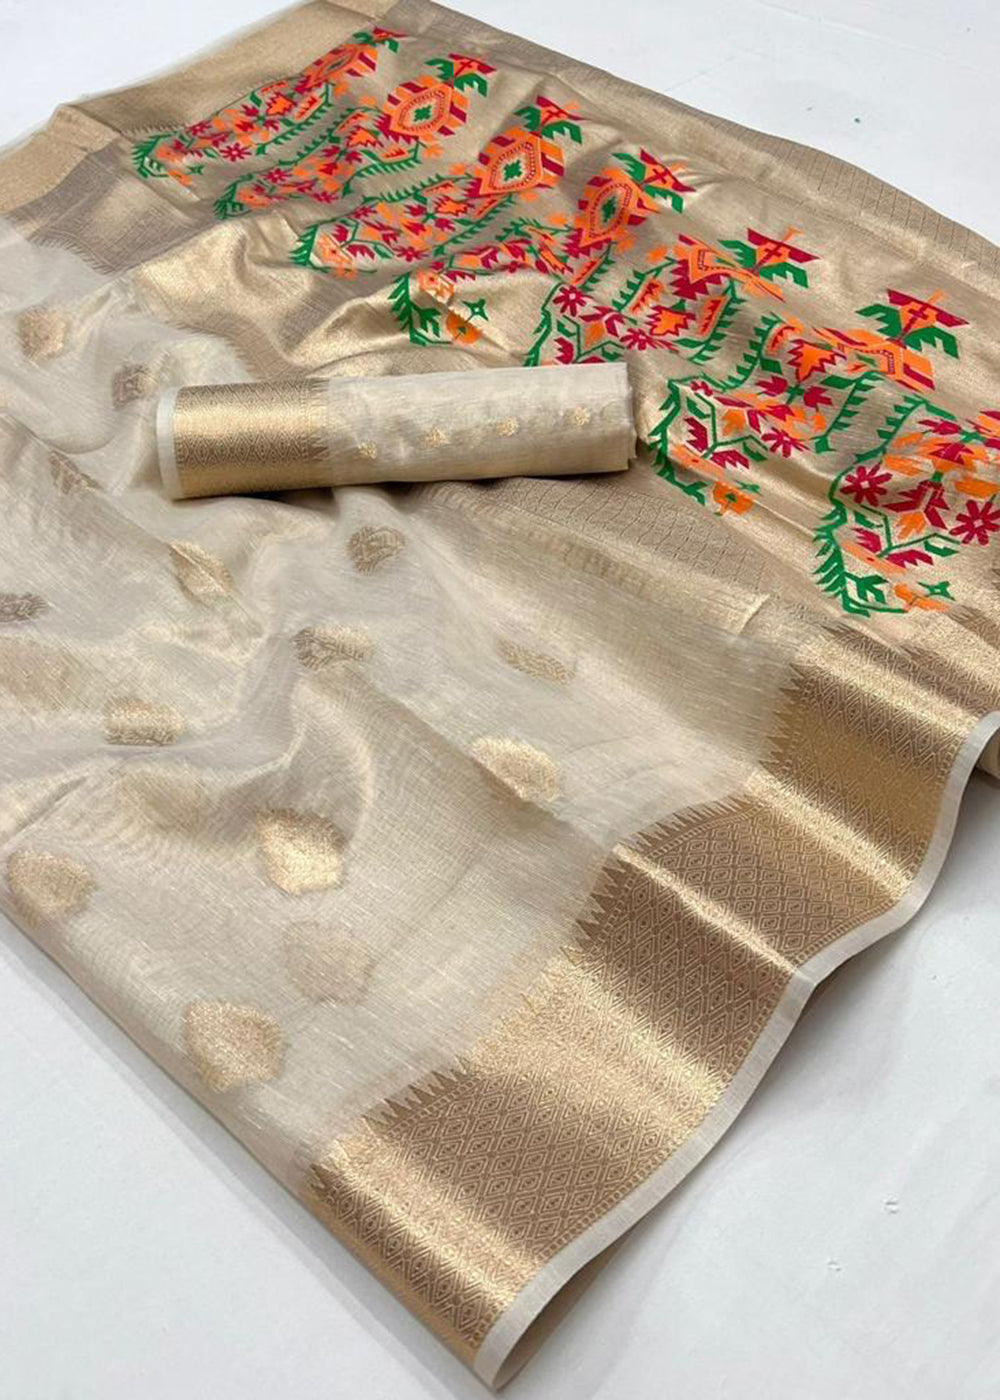 Buy Now Off White Handwoven Tissue Fabric Festive & Party Style Saree Online in USA, UK, Canada & Worldwide at Empress Clothing. 